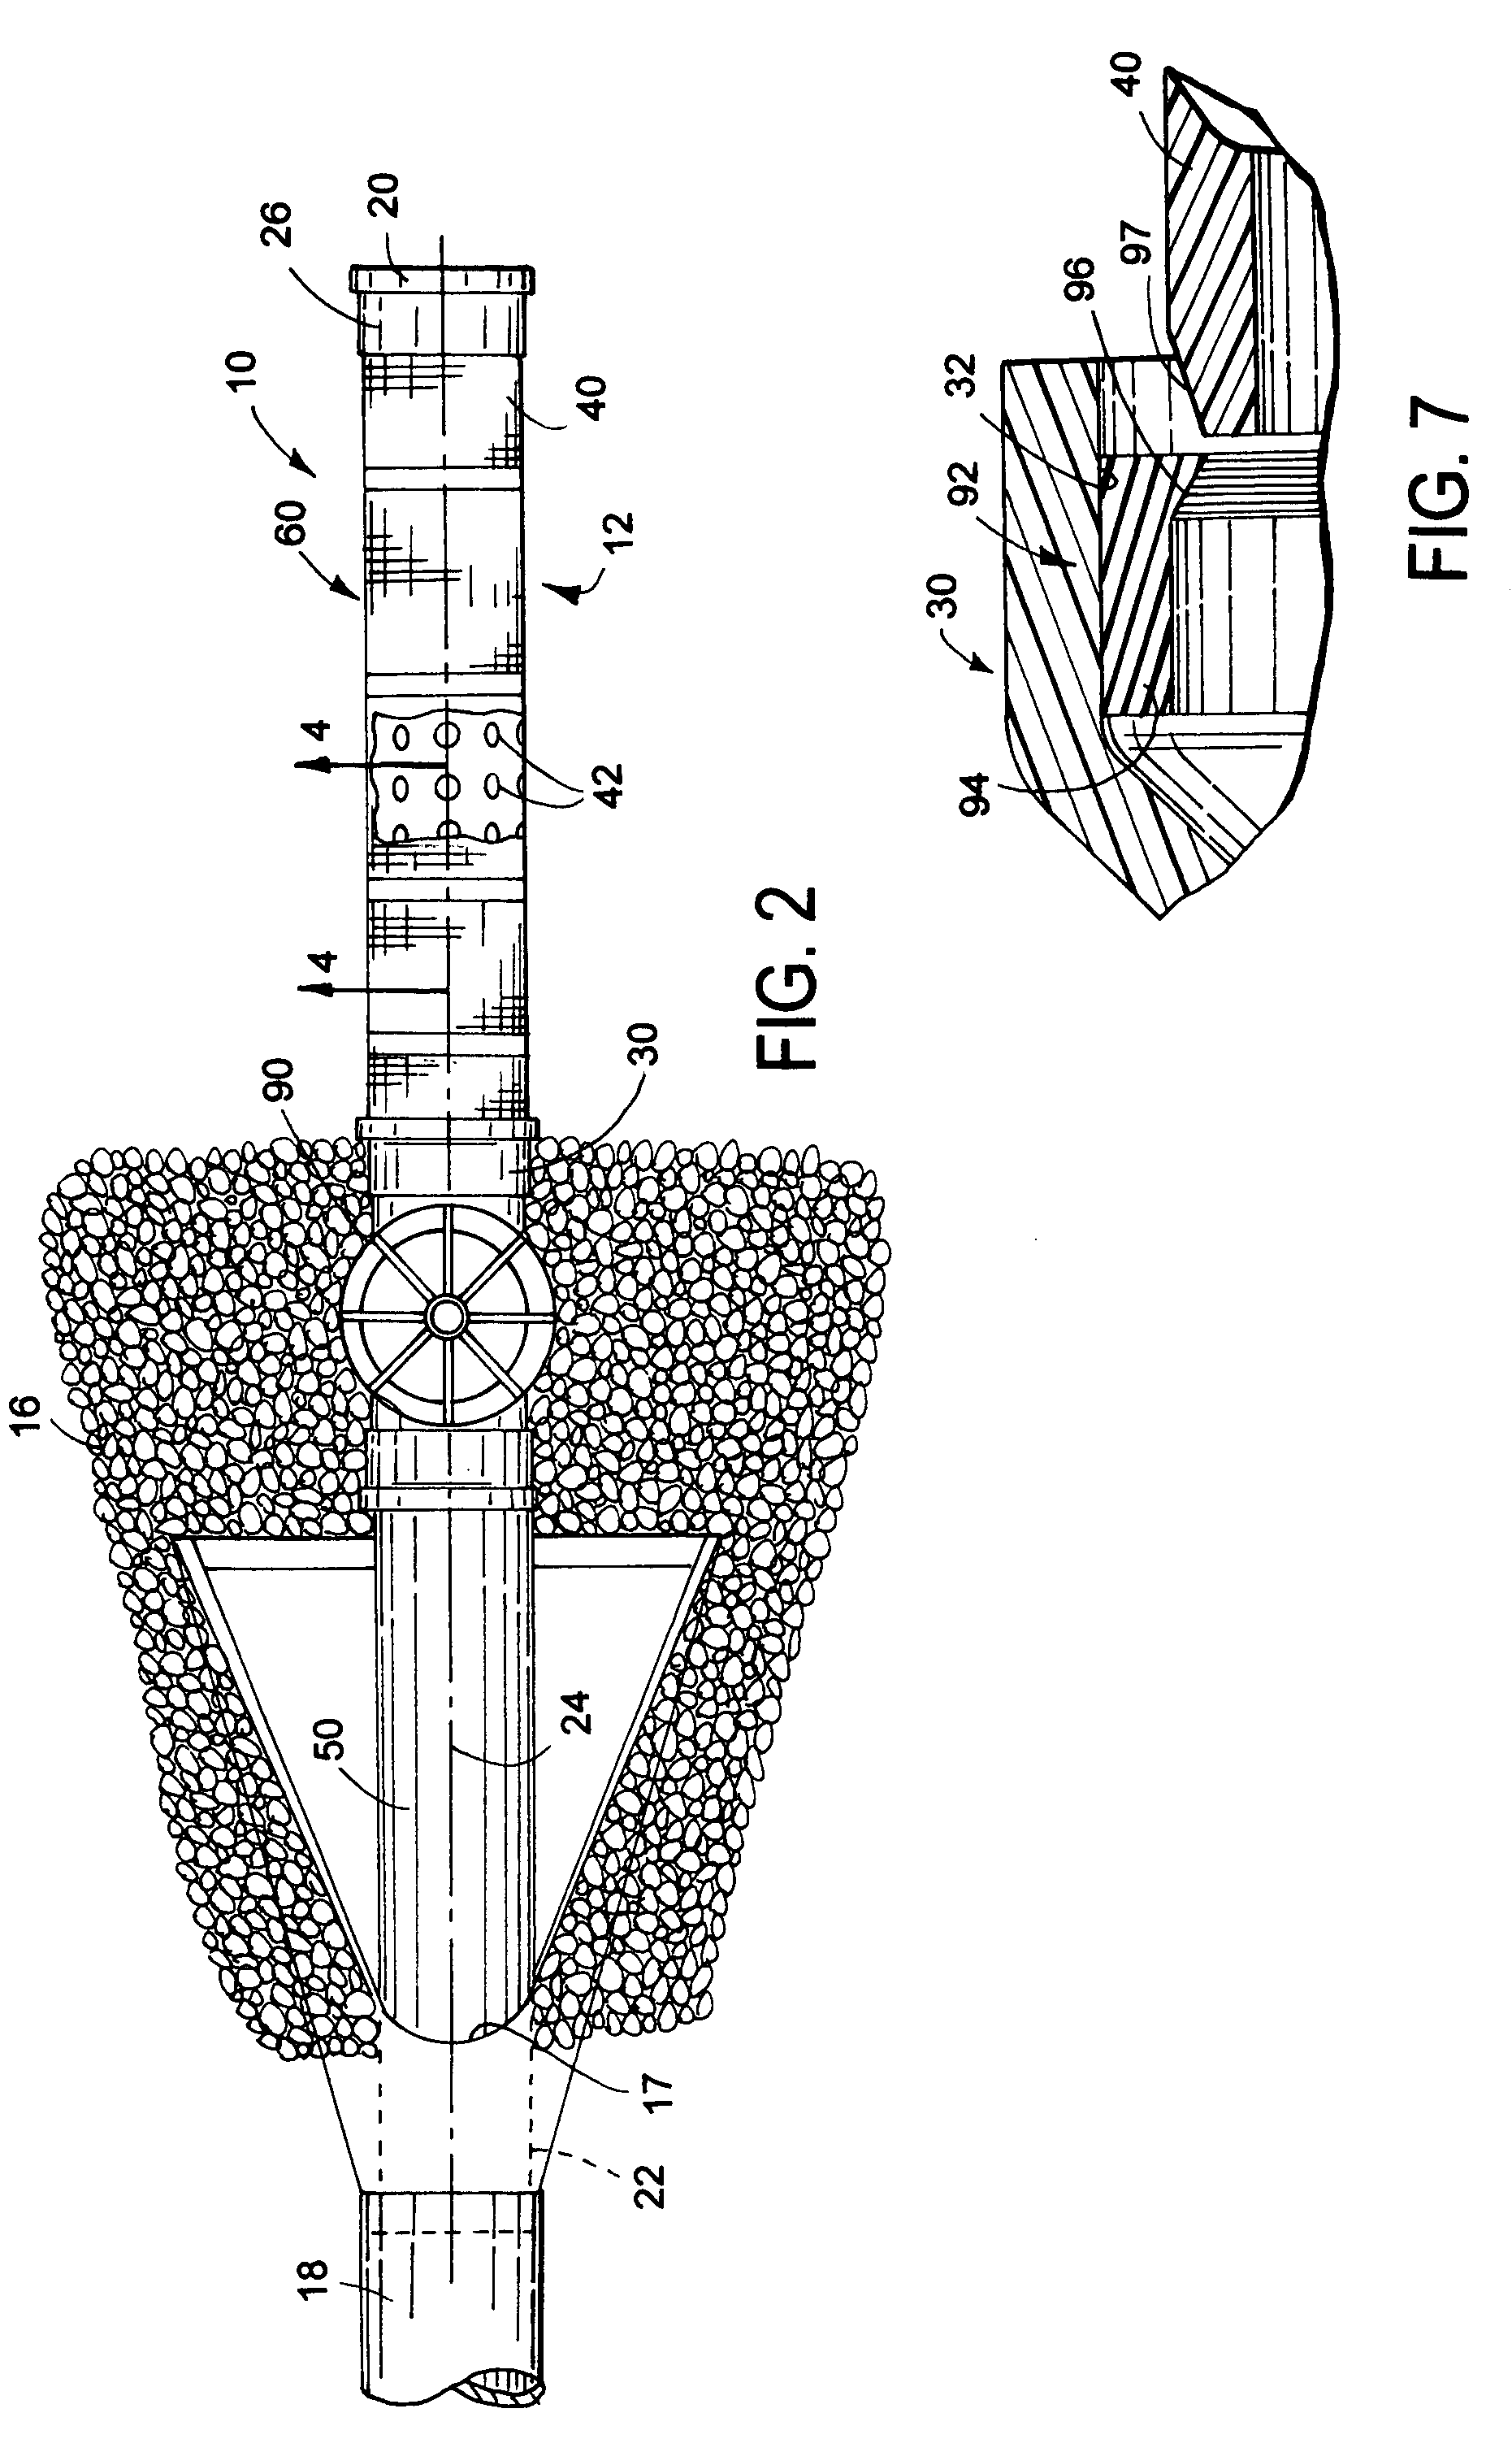 Stormwater pollution management apparatus and method of using same